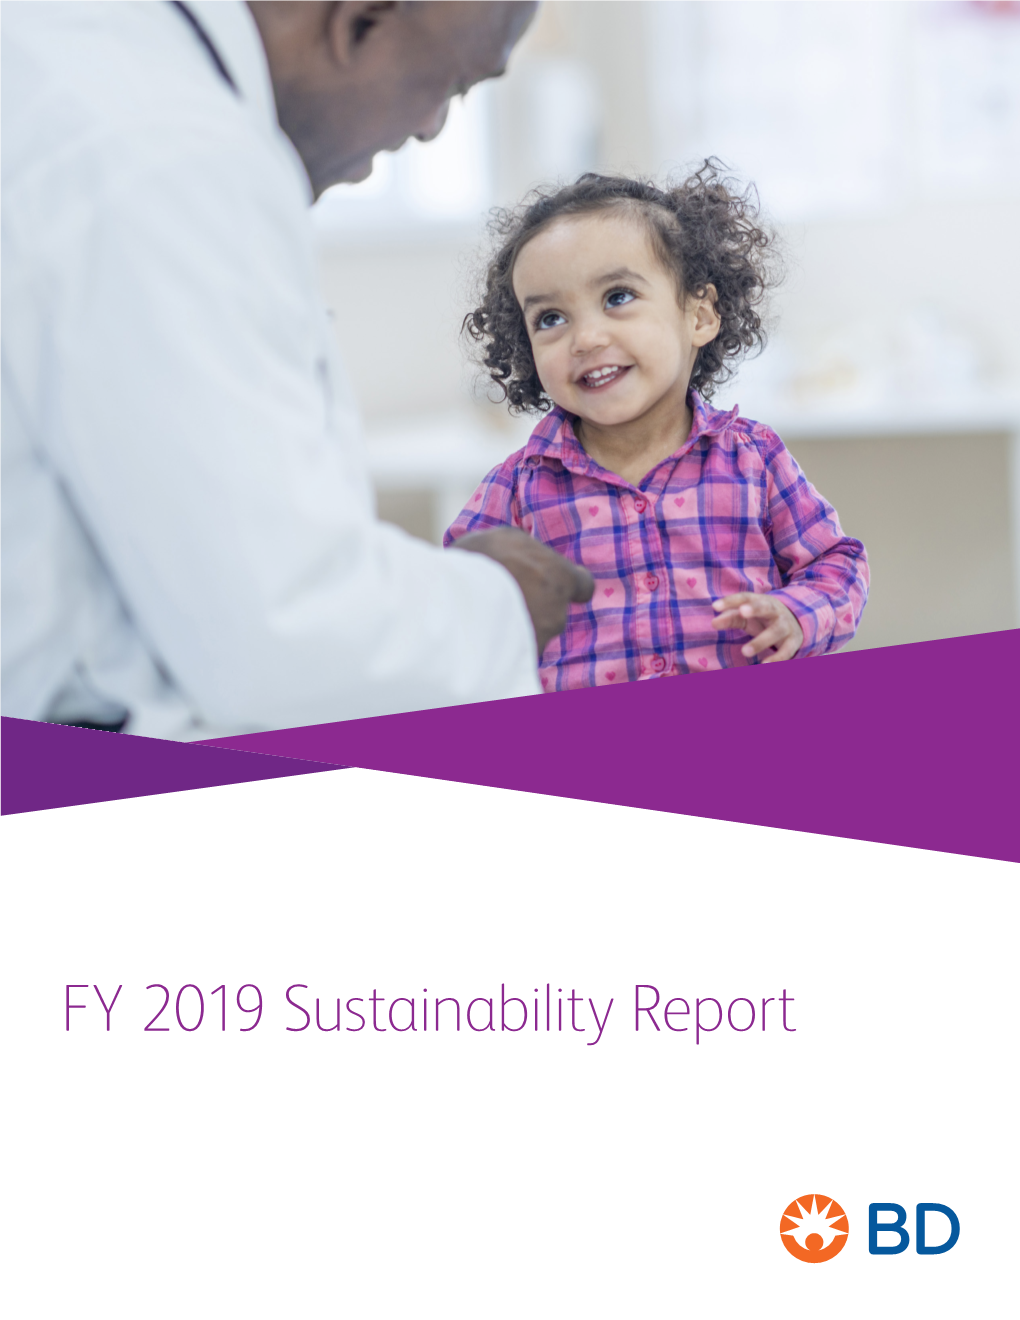 FY 2019 Sustainability Report to Our Stakeholders I Believe That Healthcare Is the Most Consequential Industry in the Efficiency World